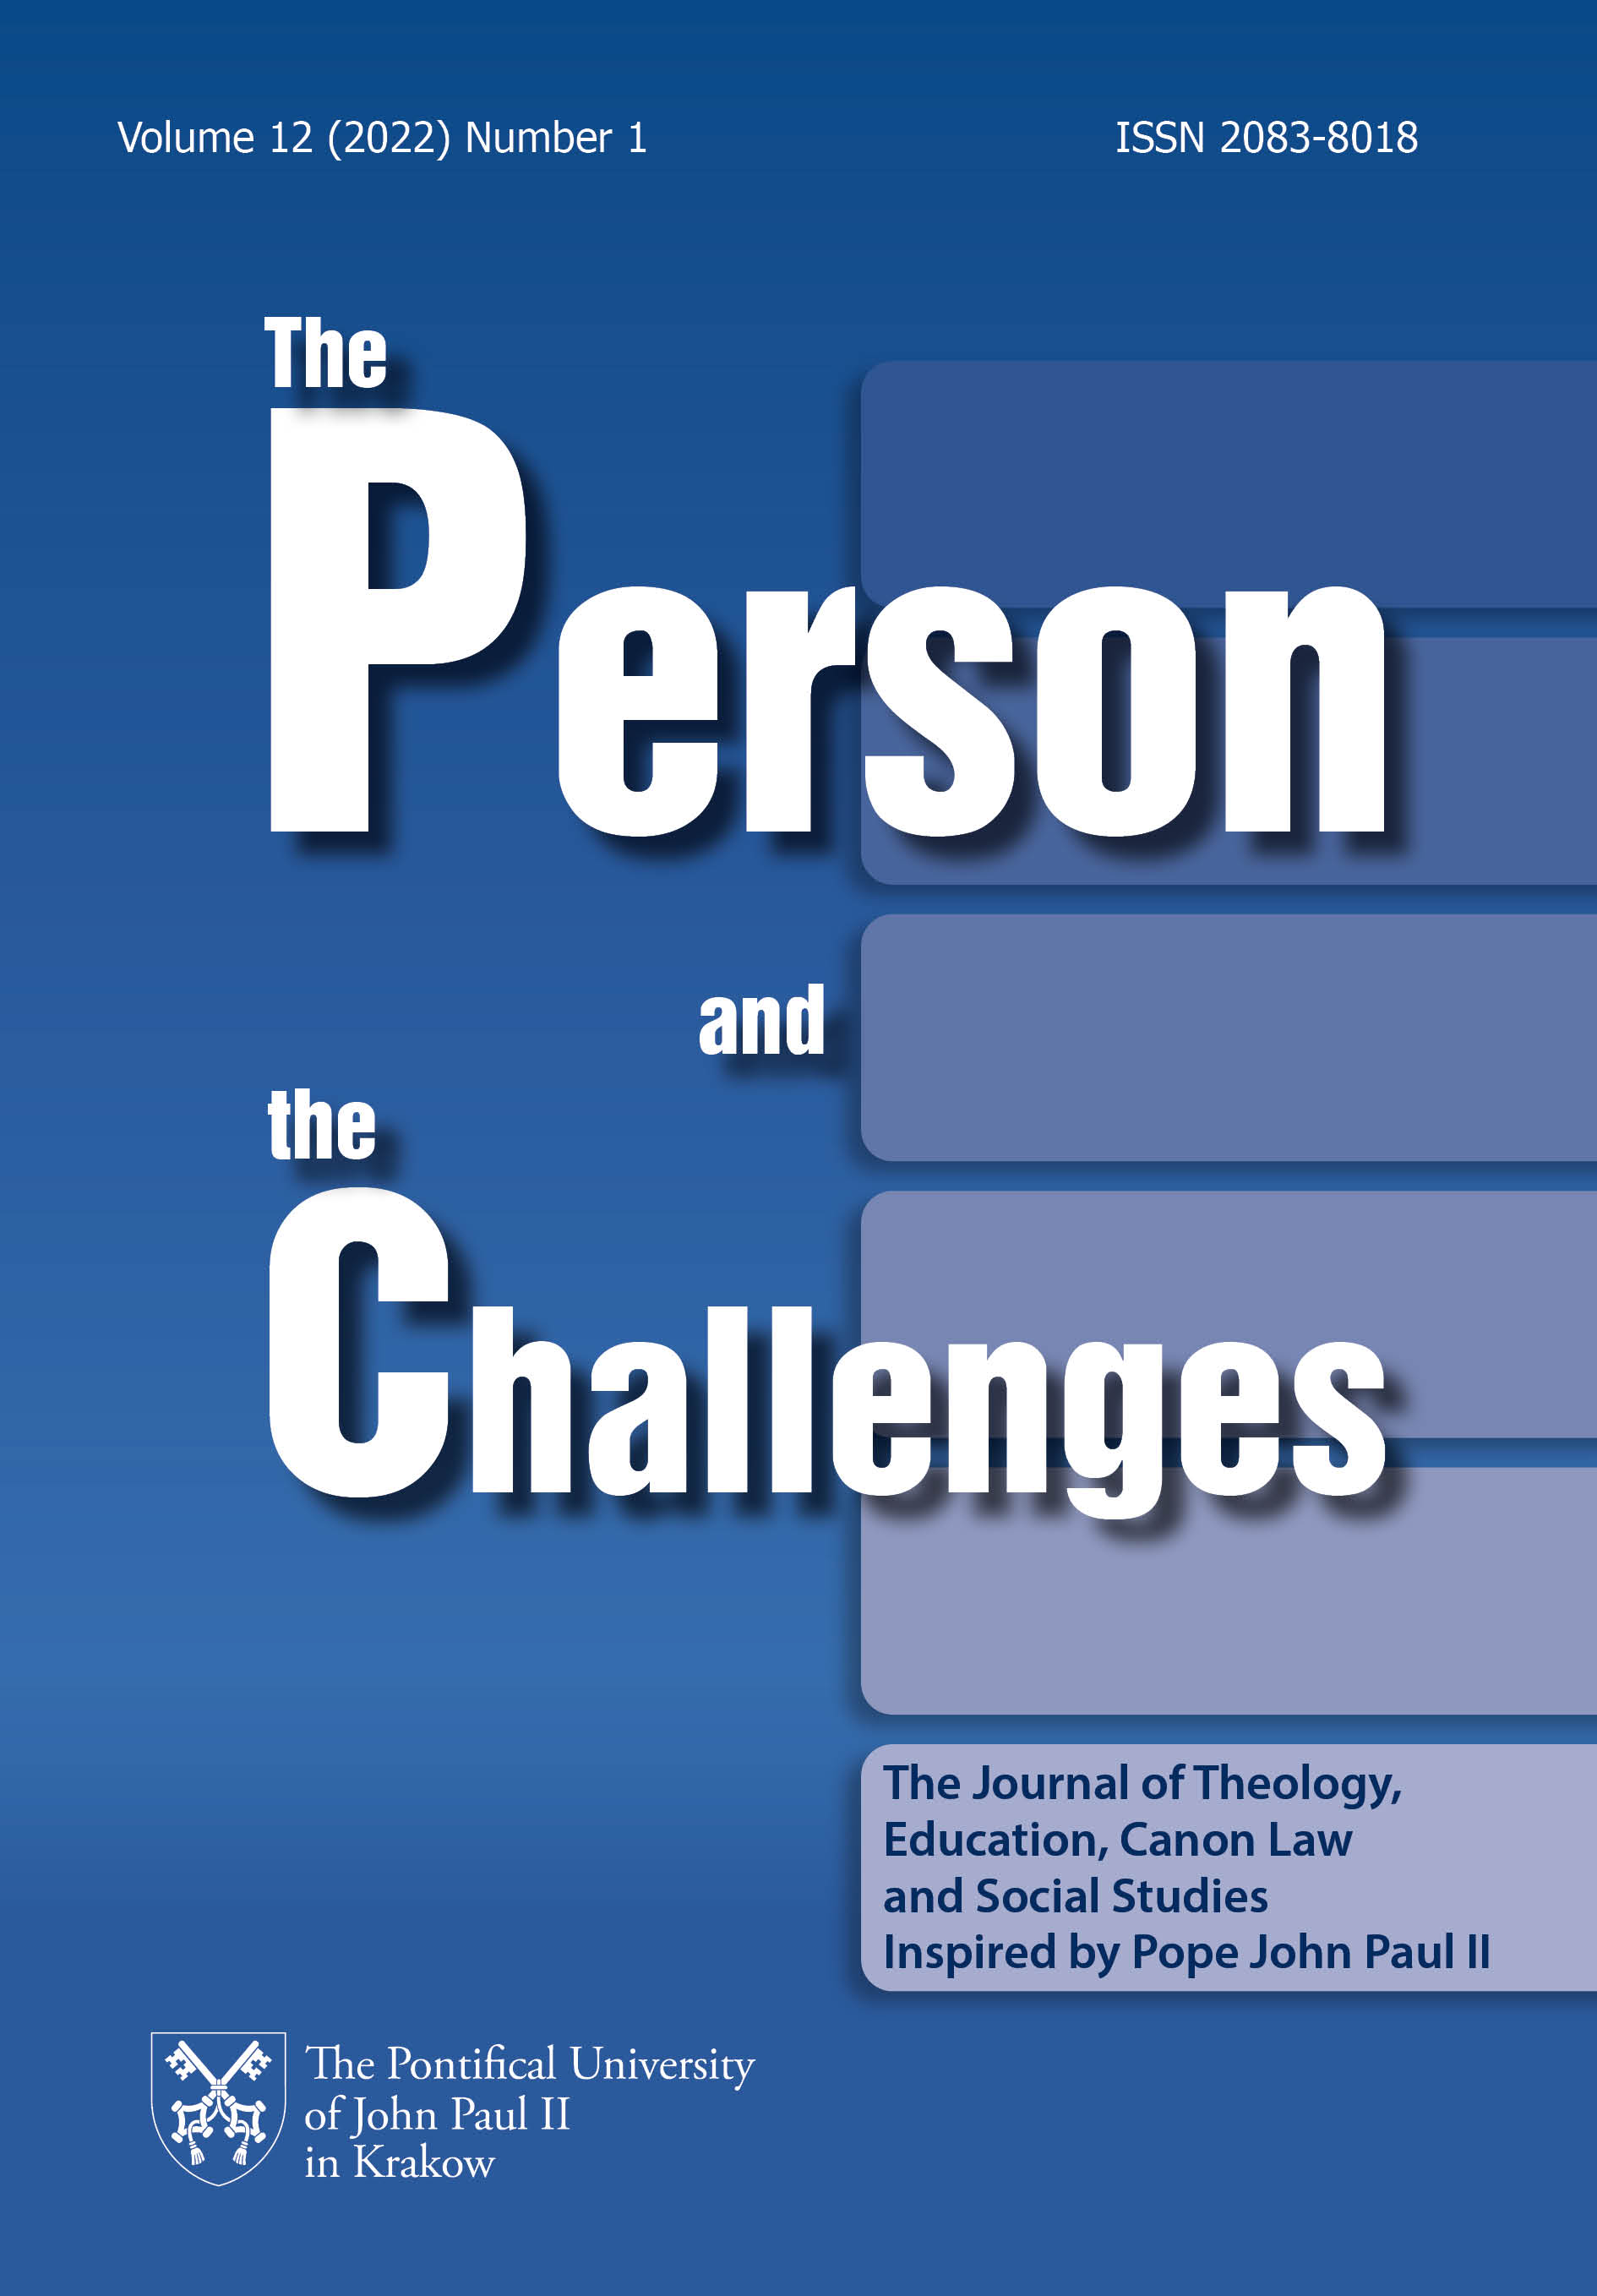 Crisis Communication in the Context of Child and Youth Protection – Diagnosis, Problems, Challenges. The Case of the Catholic Church in Poland Cover Image